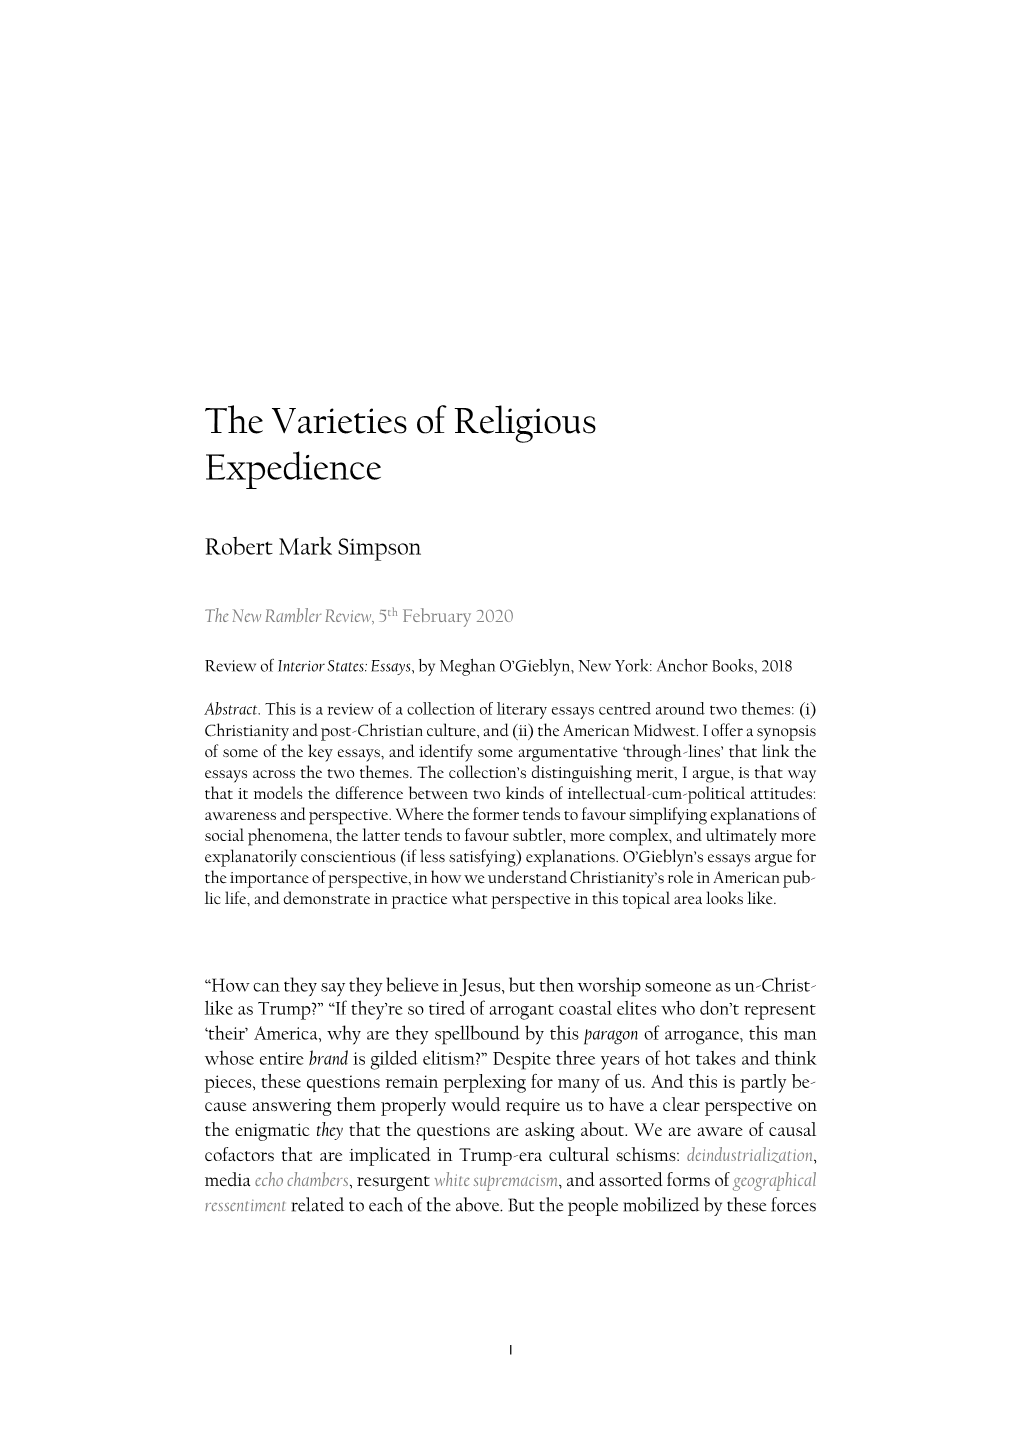 The Varieties of Religious Expedience